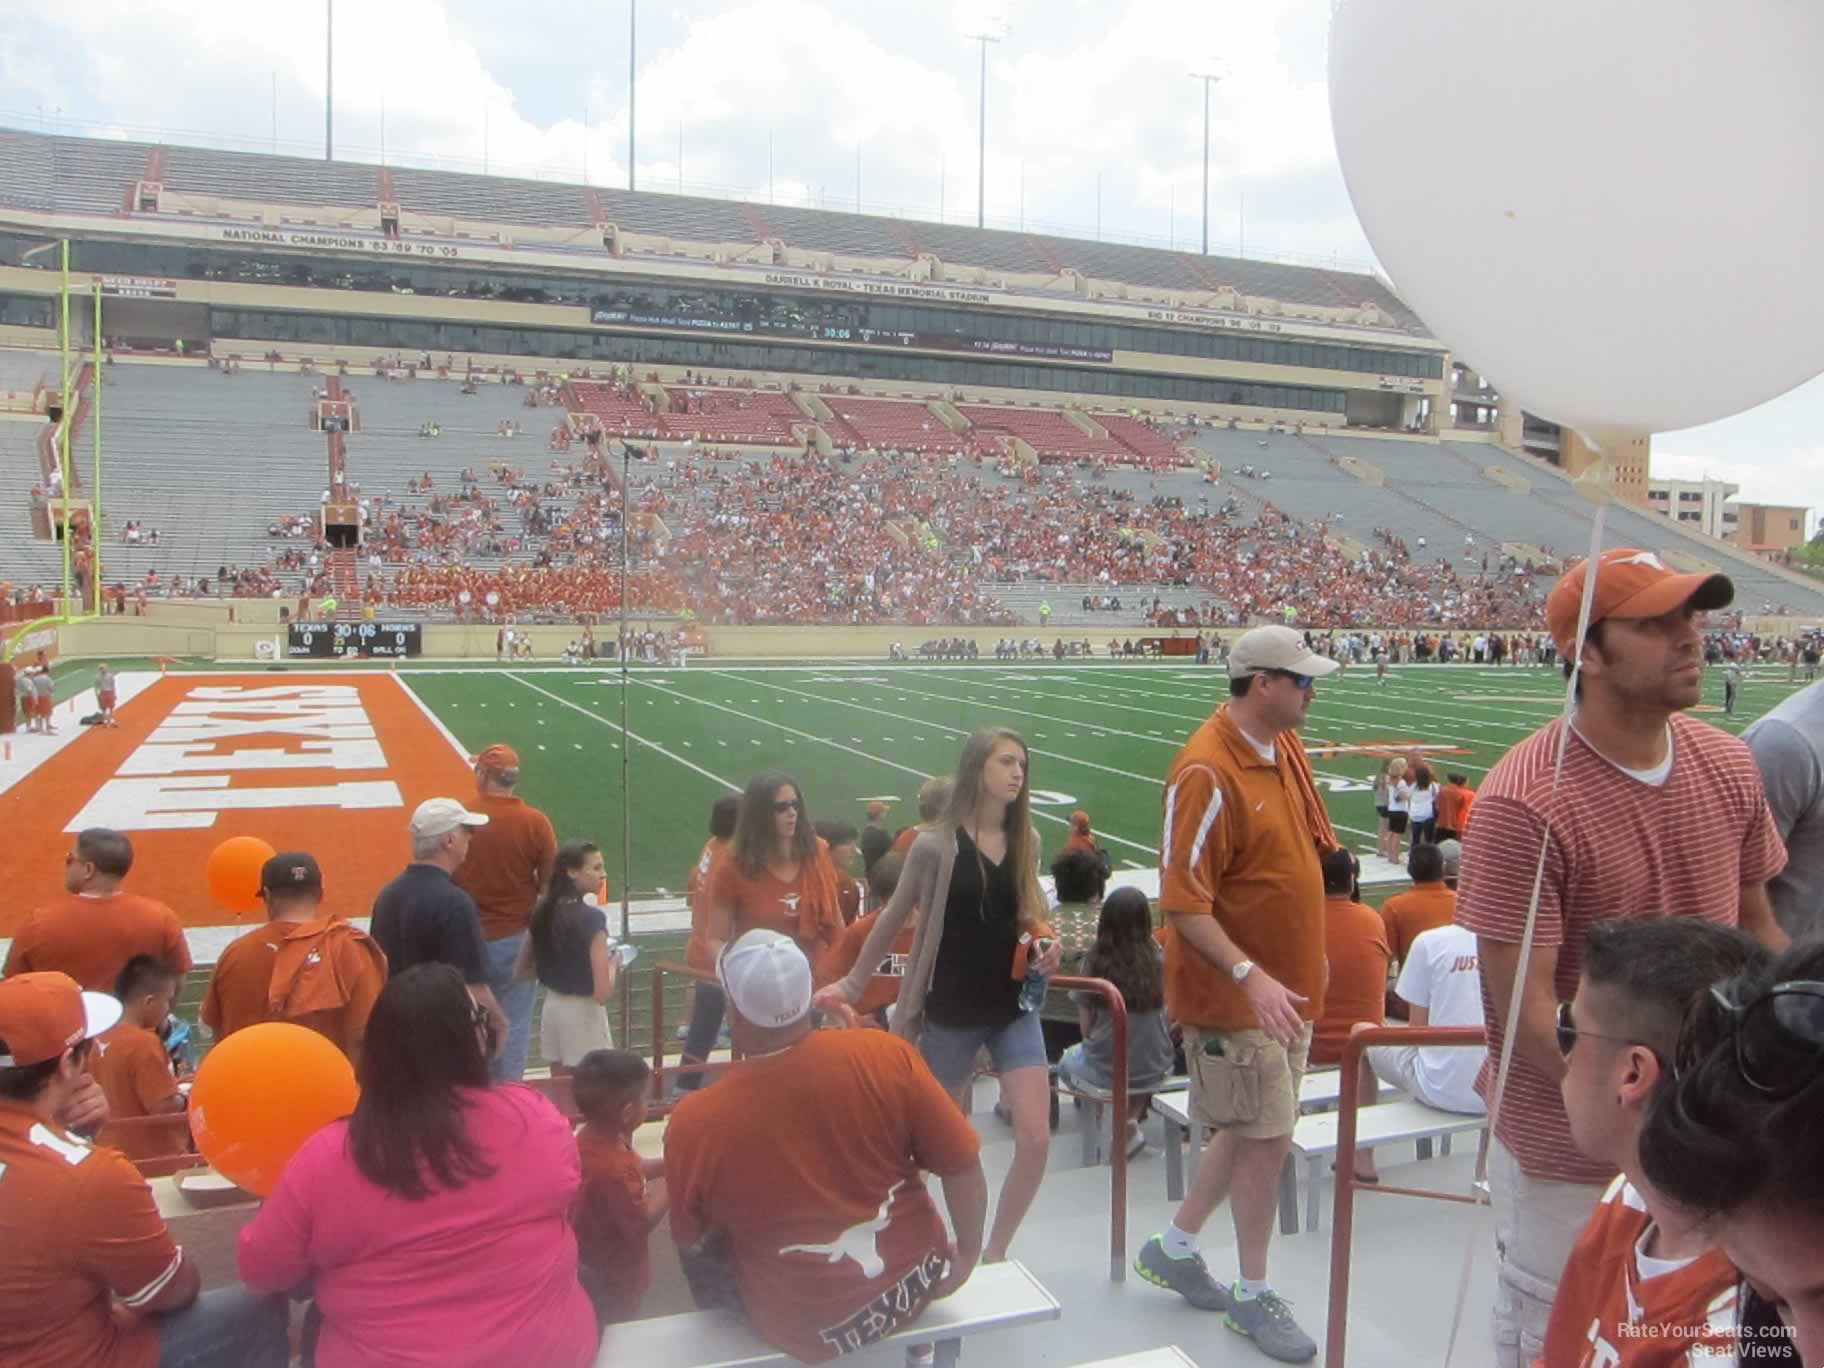 section 7, row 11 seat view  - dkr-texas memorial stadium